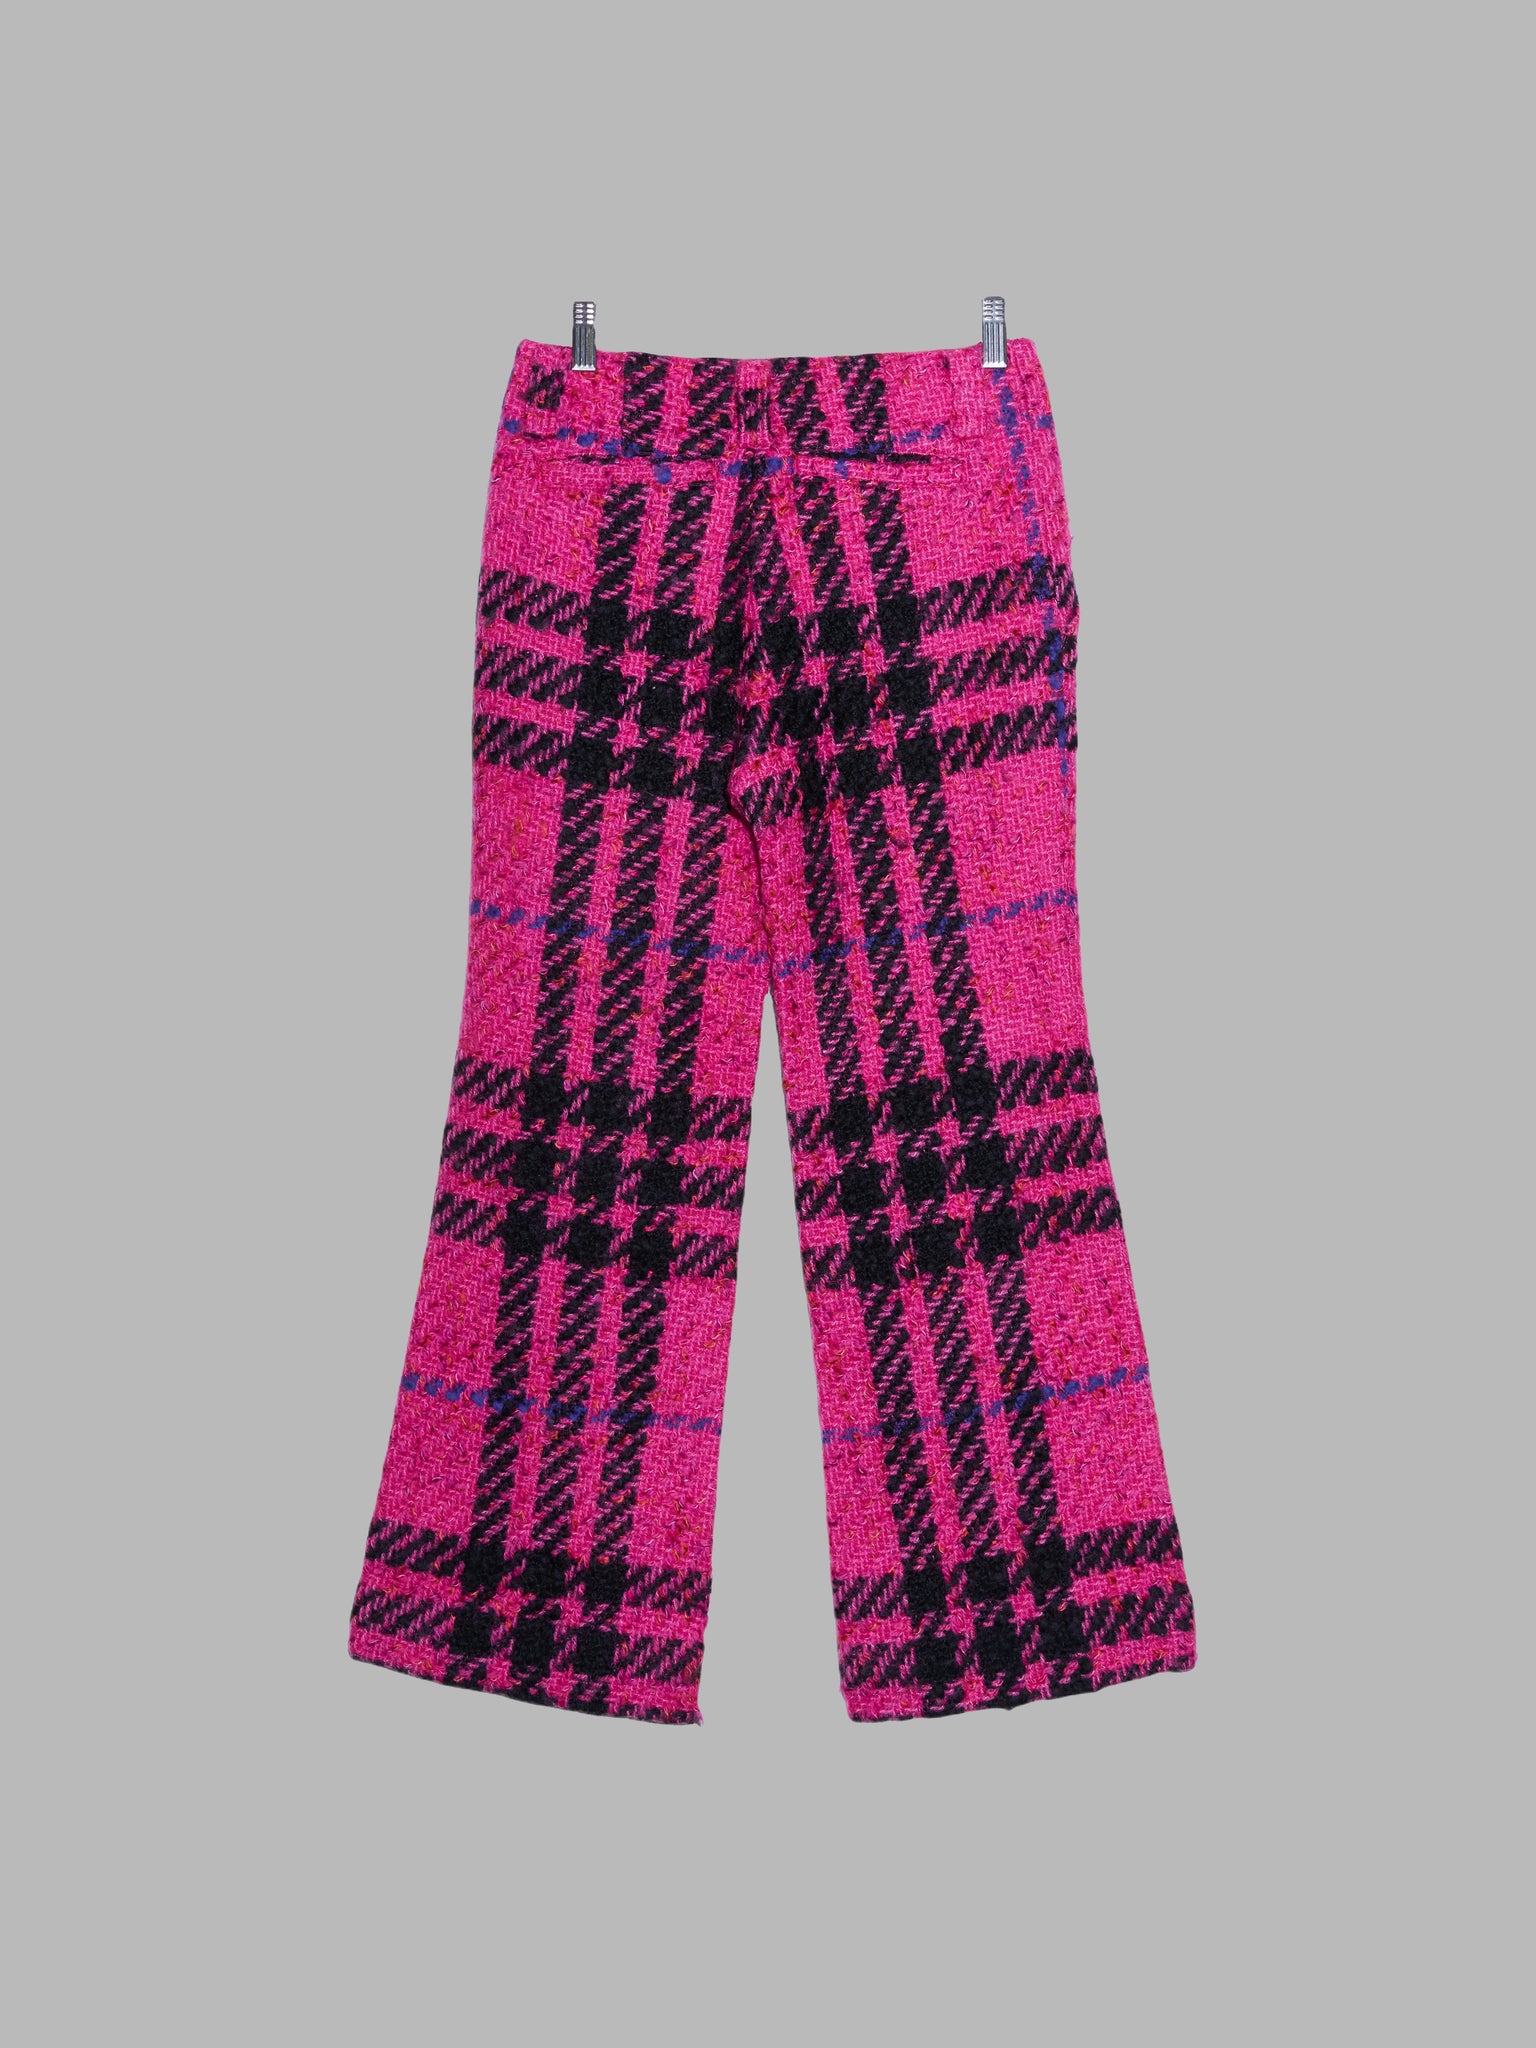 Junya Watanabe Comme des Garcons AW2001 pink black wool check trousers - sz S